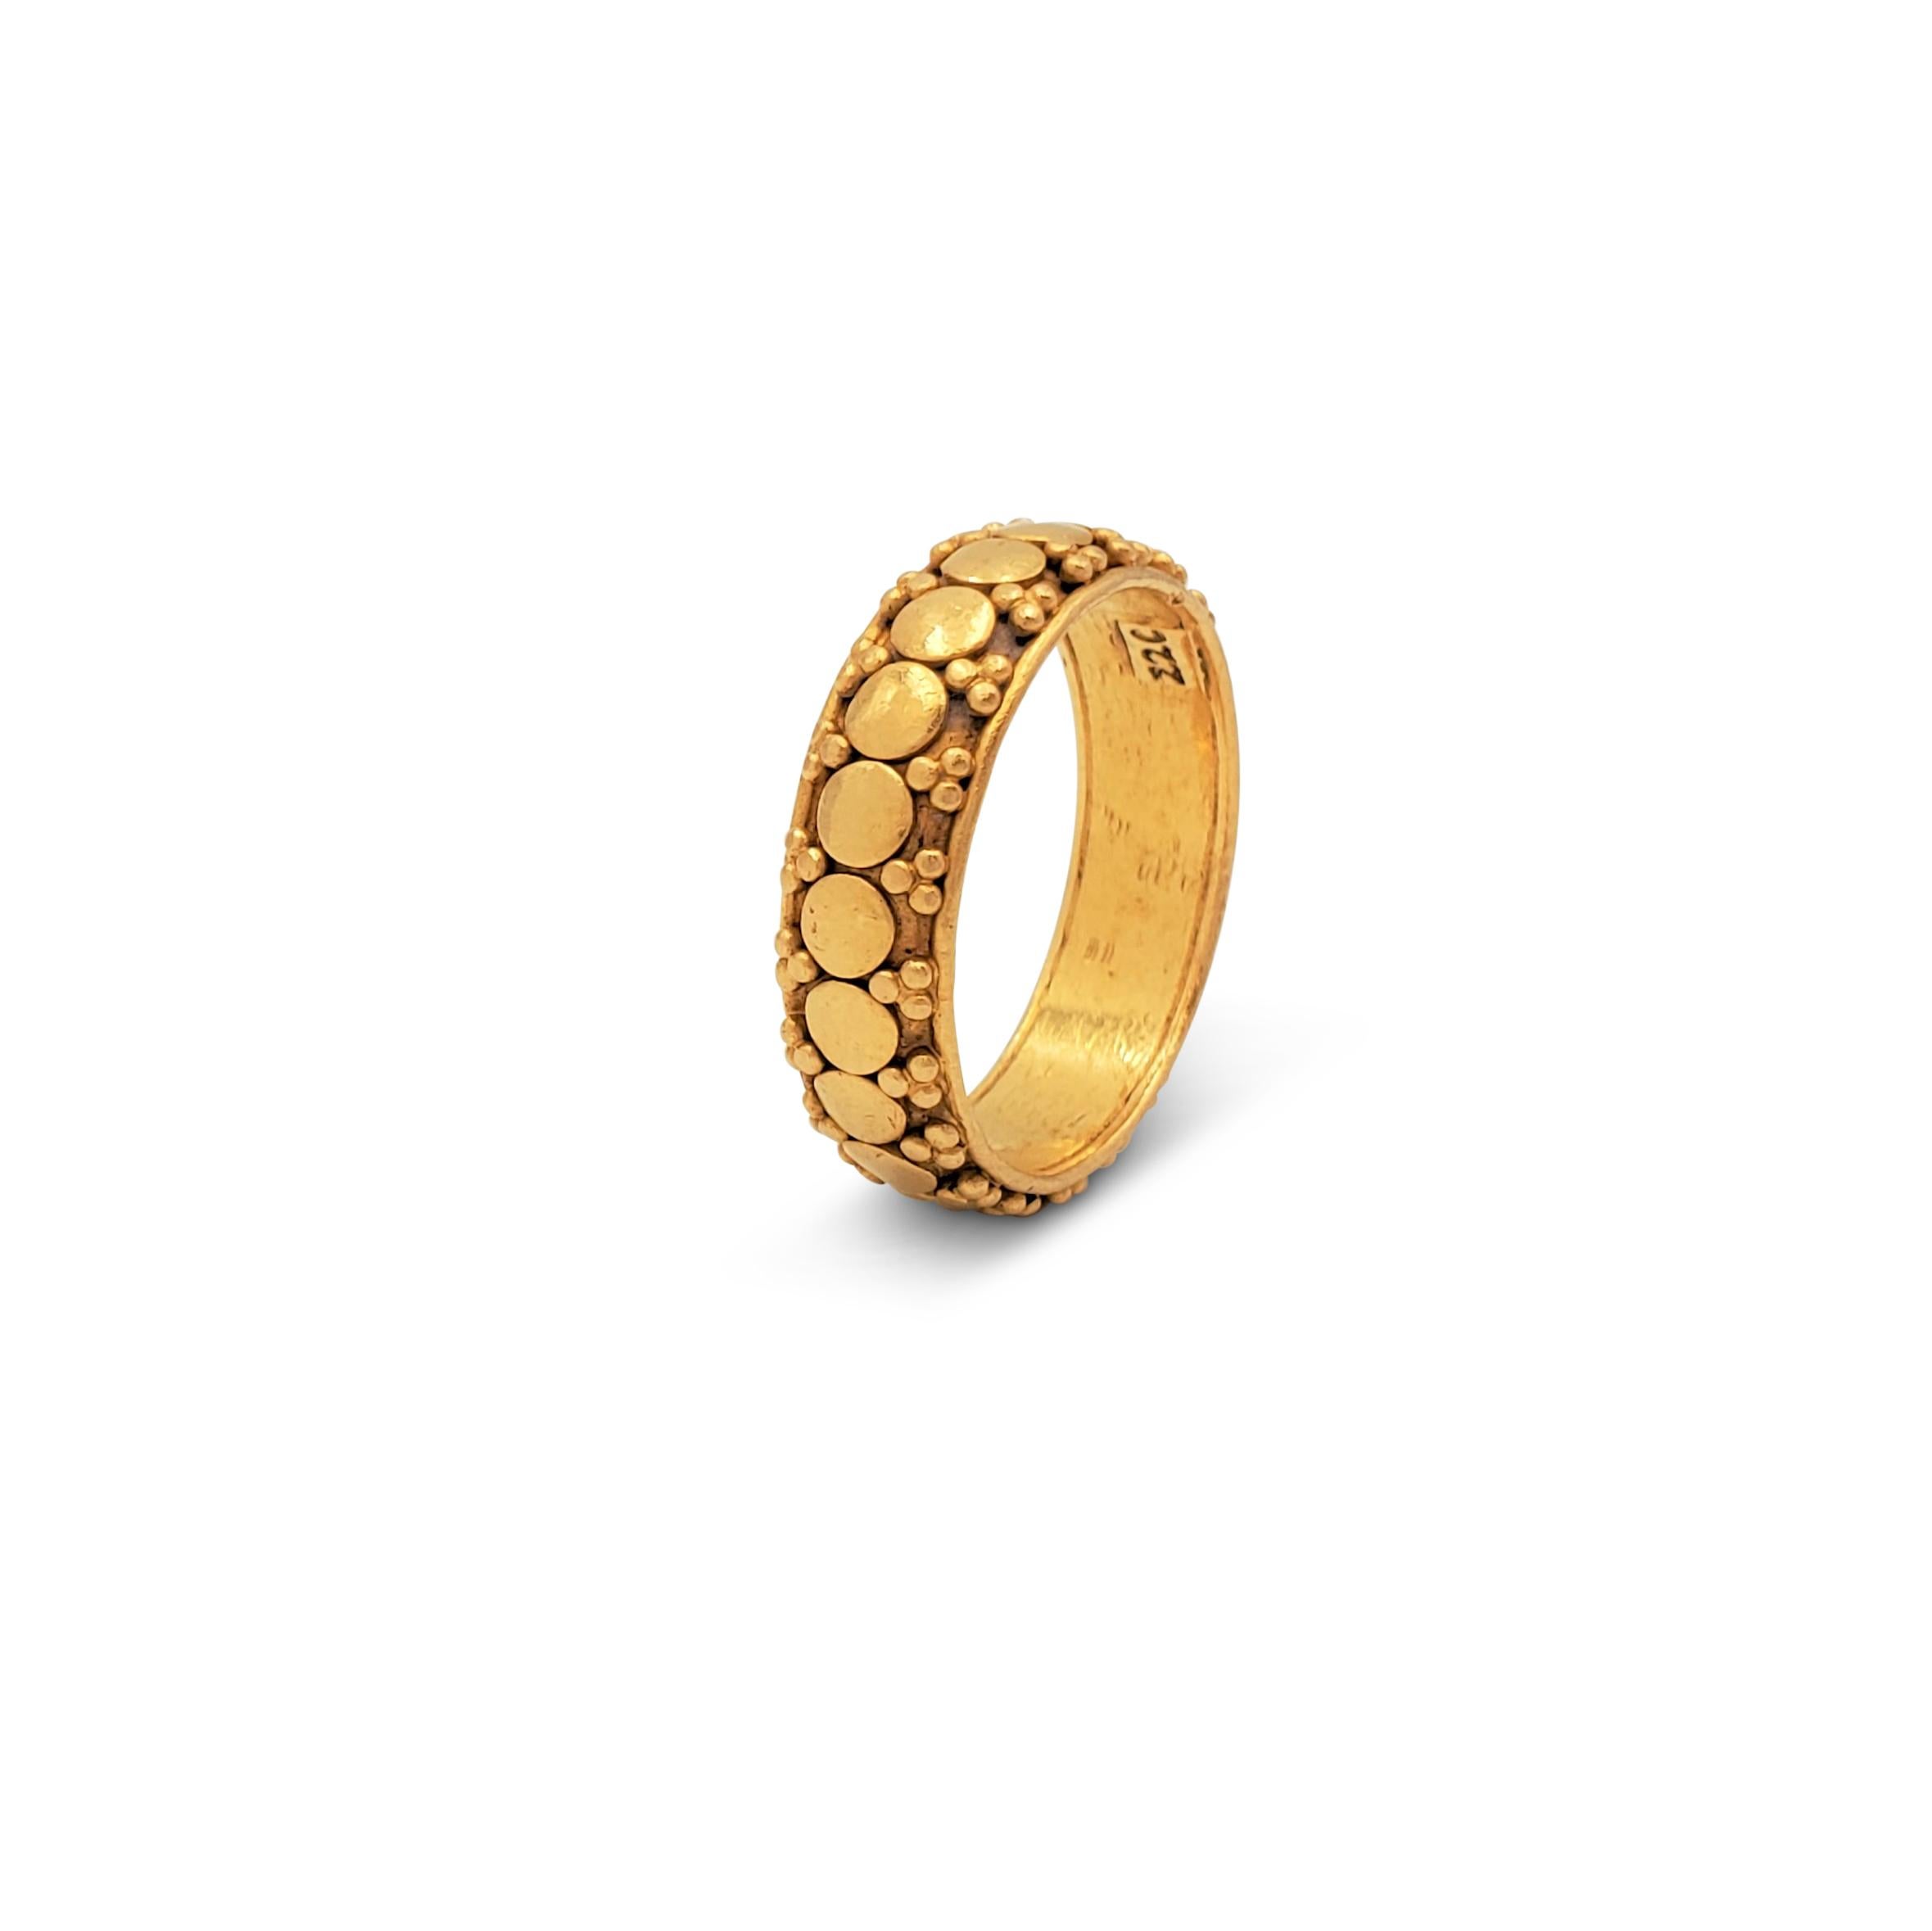 A versatile textured band ring crafted in 22 karat gold. Marked 22C. Ring size US 7. The ring is not presented with the original box and papers. CIRCA 2000s.

Ring Size: US 7
Box: No
Papers: No